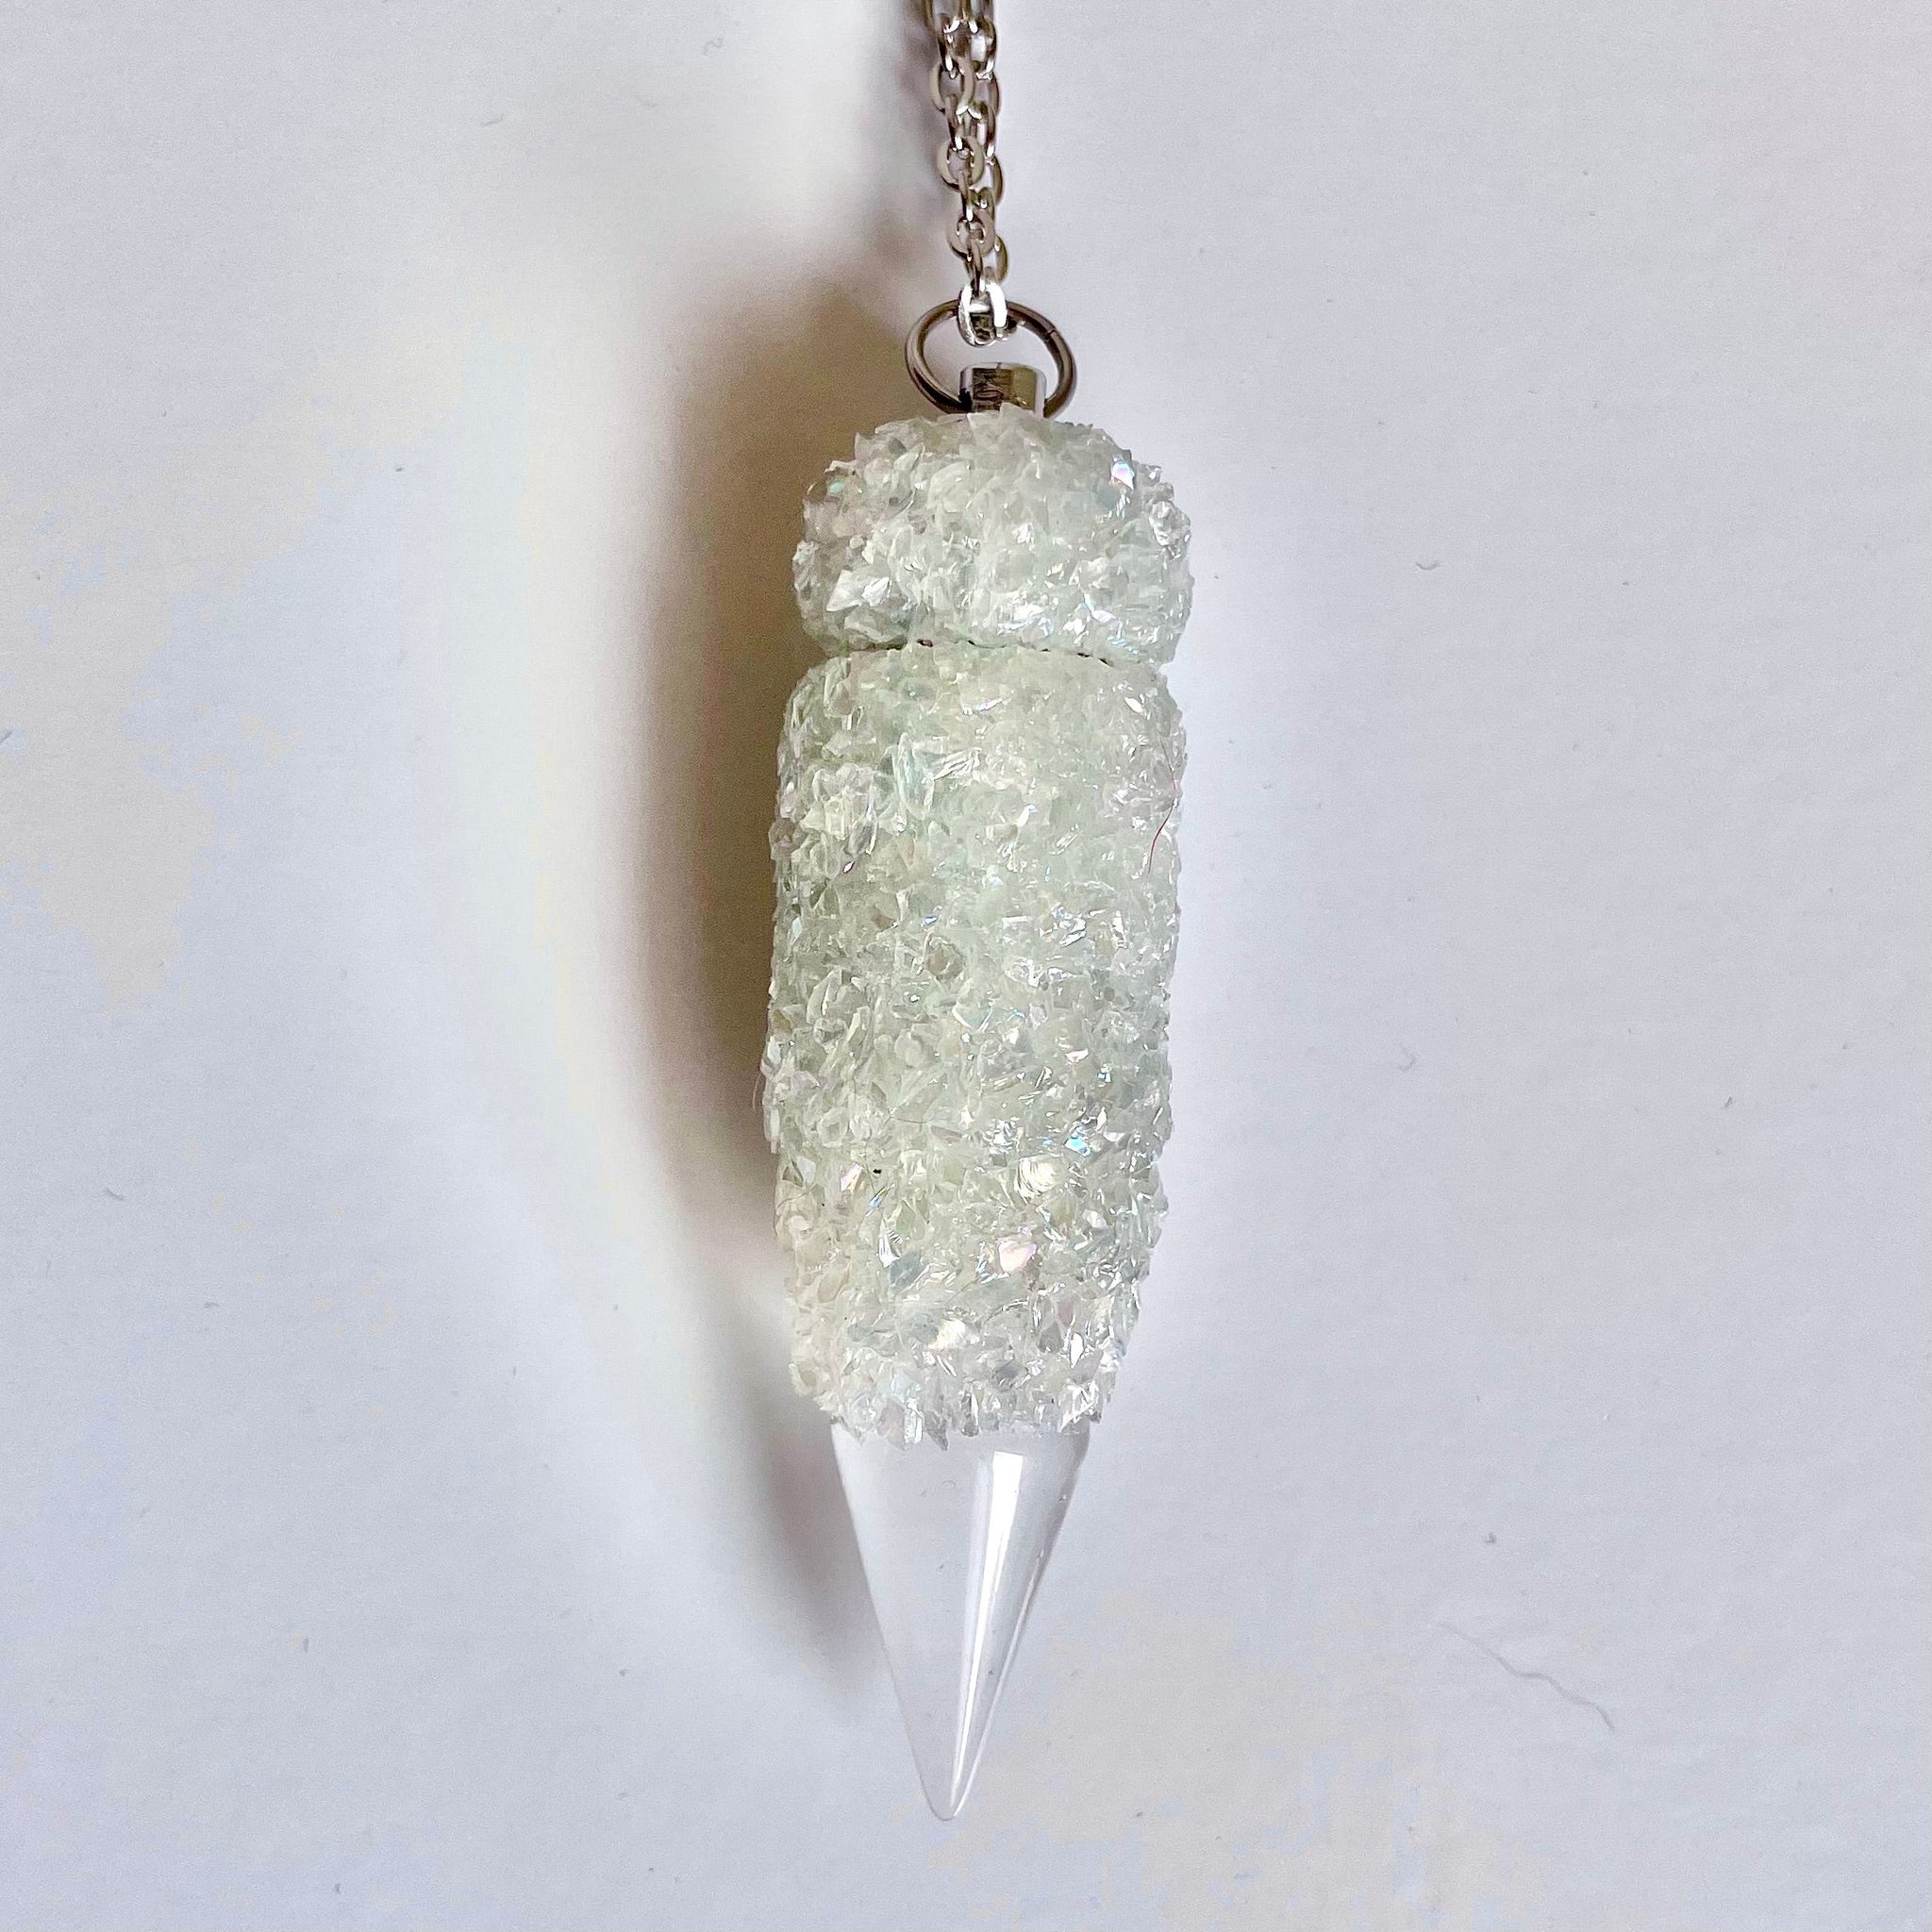 Crystal Stash Necklace With Spoon – Rave Fashion Goddess